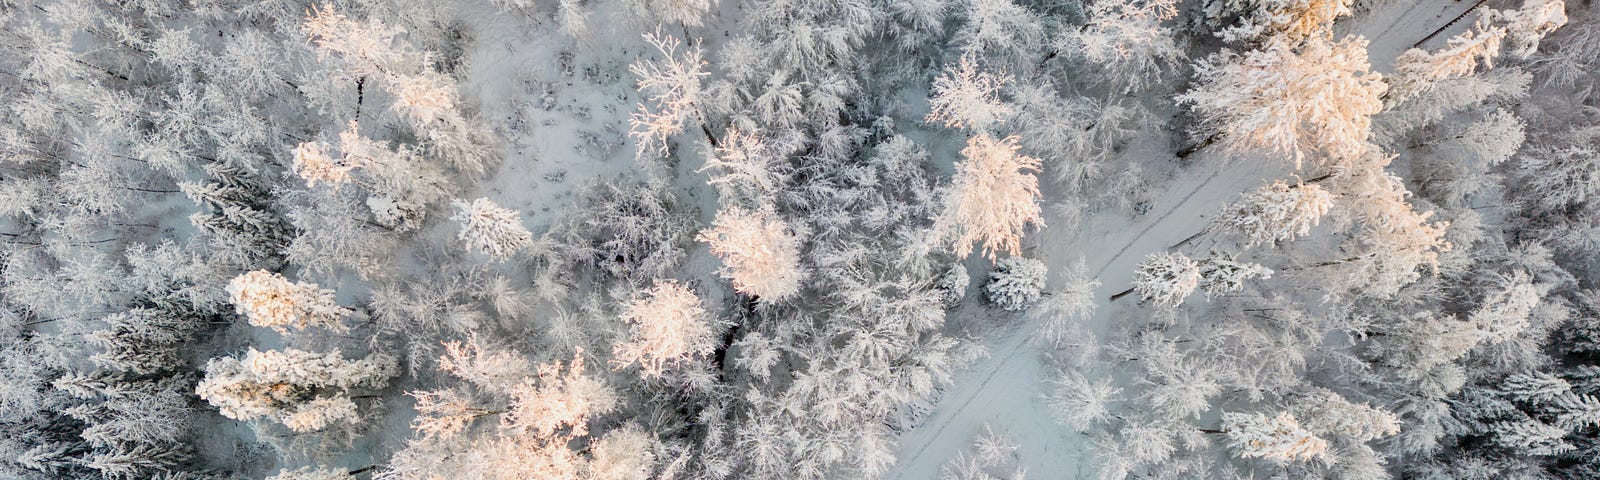 A picture of a snowy forest from a drone